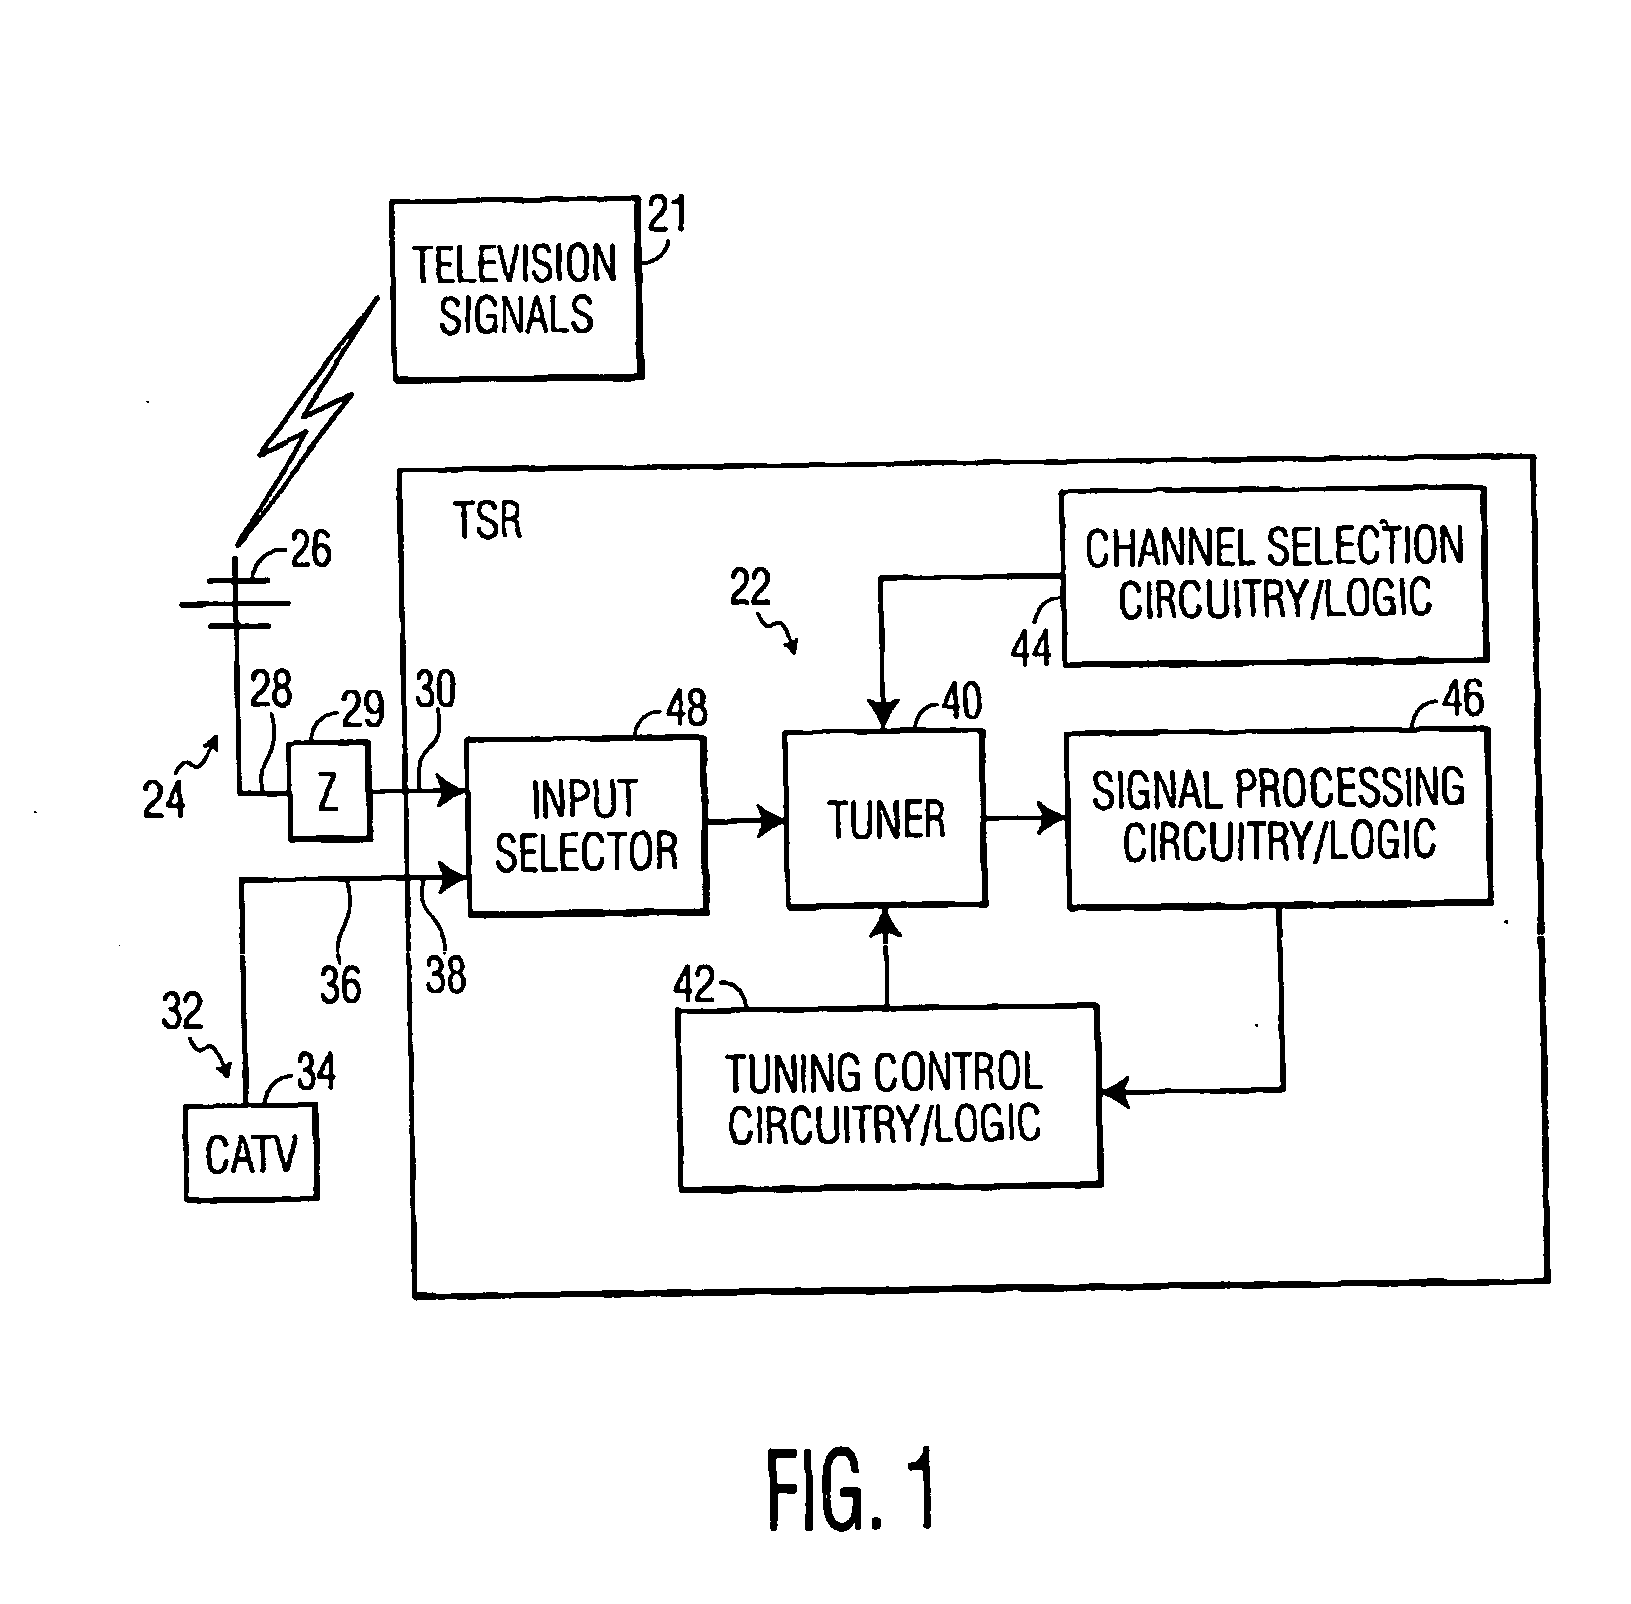 Tuner input filter with electronically adjustable center frequency for adapting to antenna characteristic